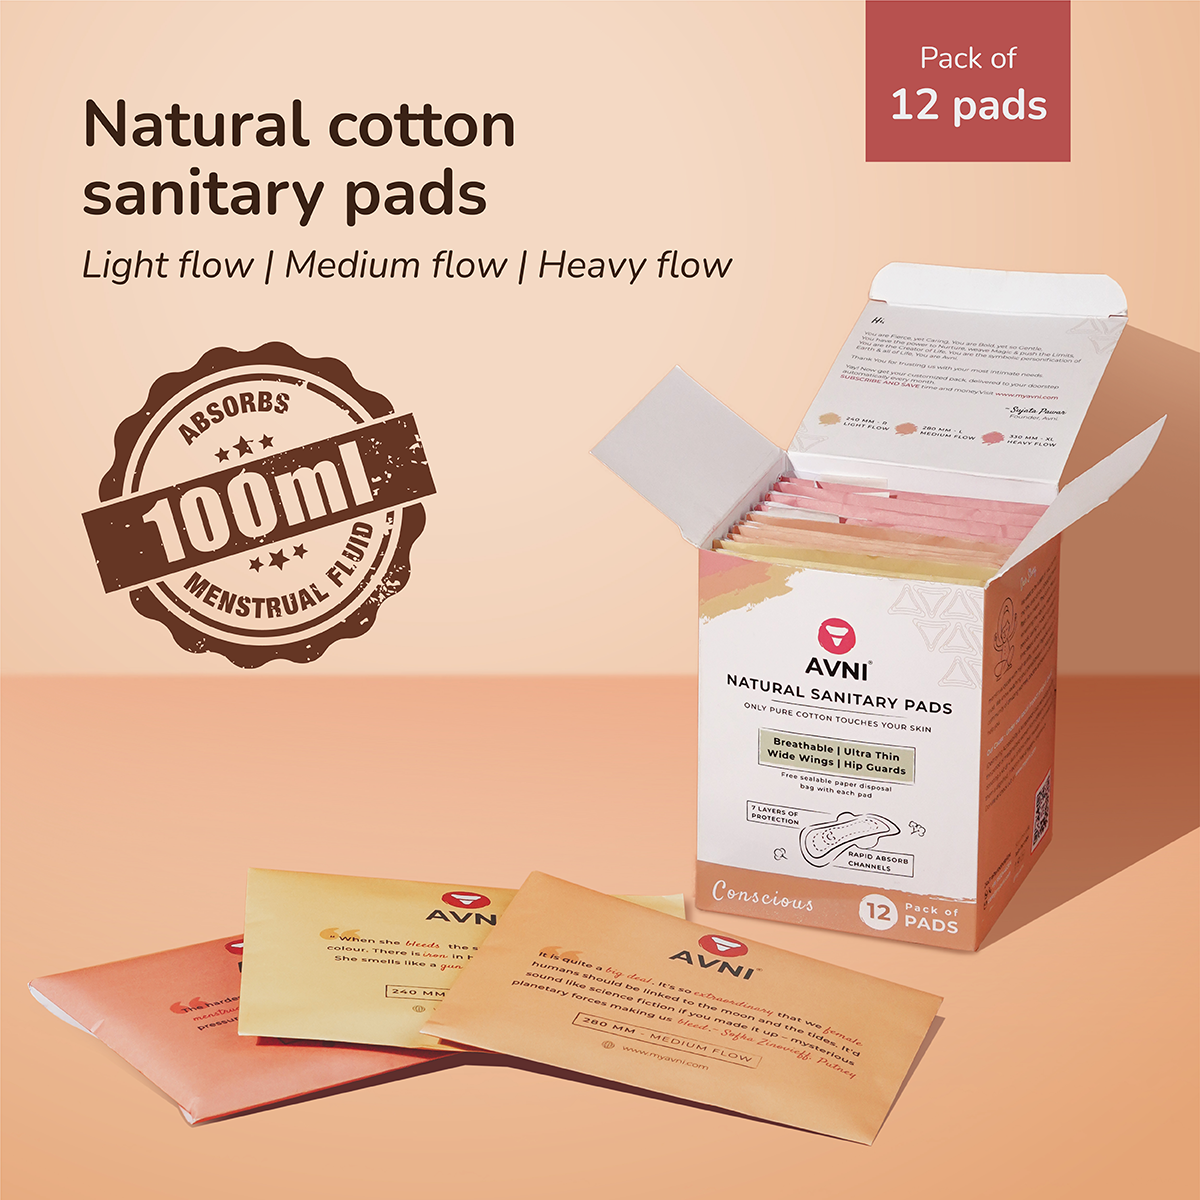 Natural Cotton Sanitary Pads - Cycle Pack of 12 Pads